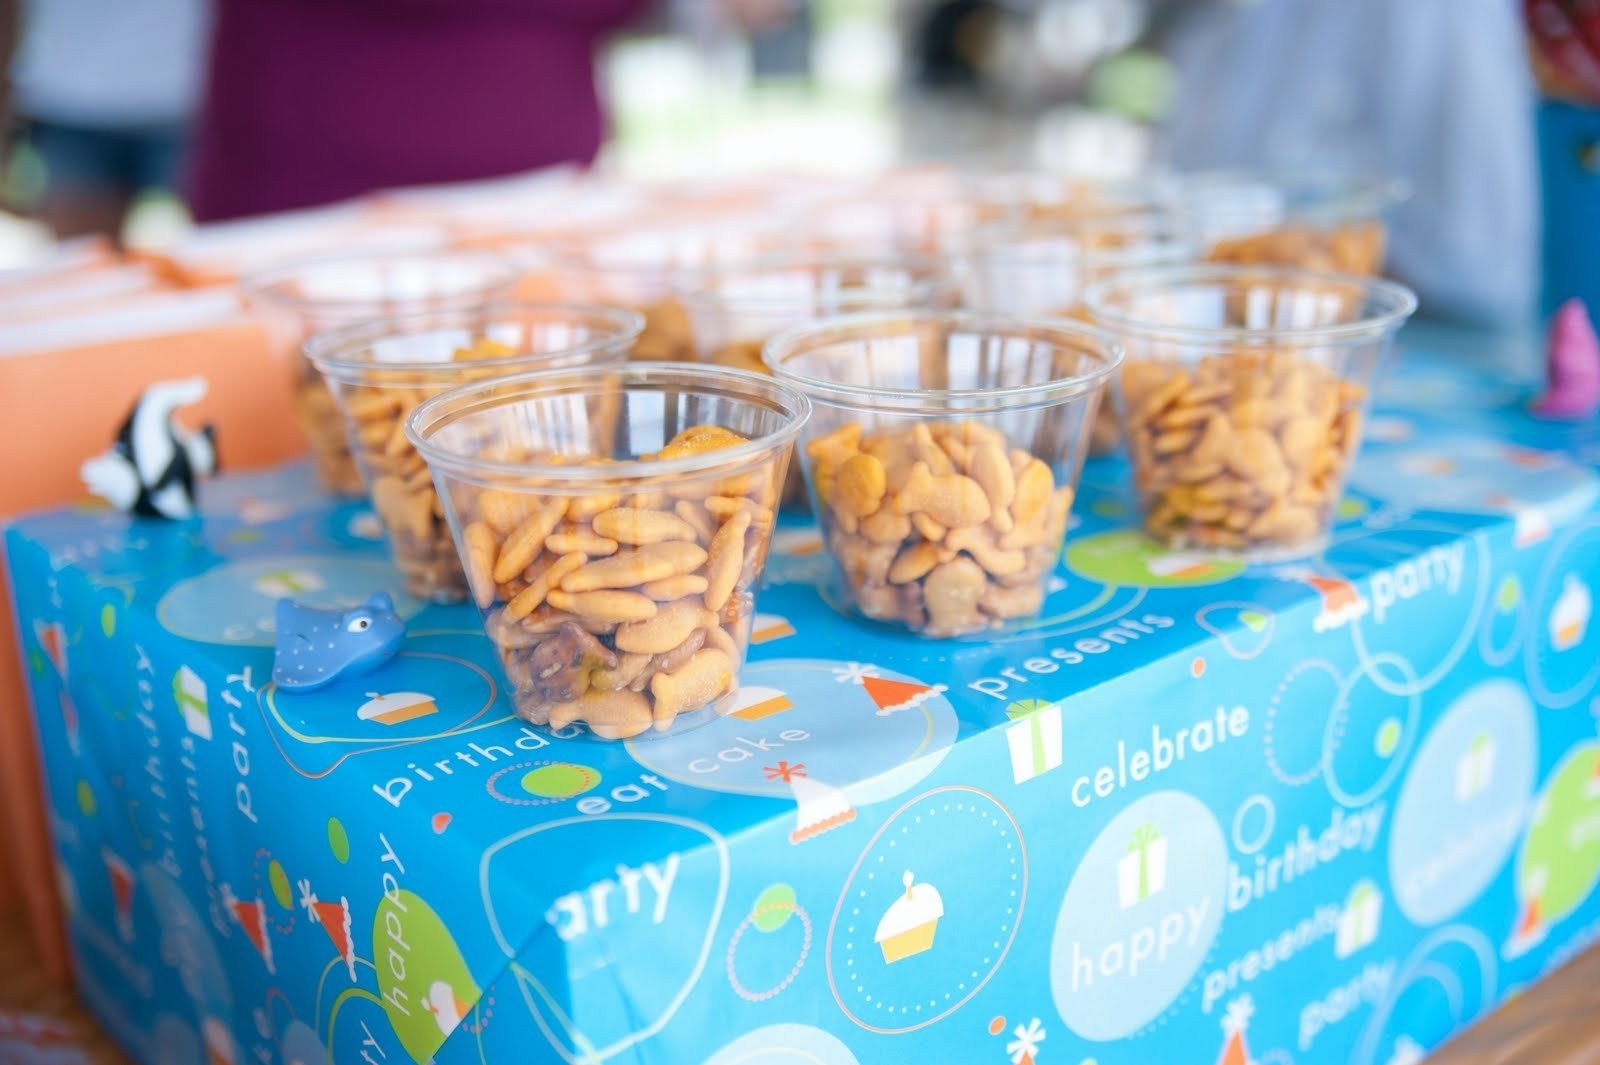 10 Stylish Finding Nemo Birthday Party Ideas gold fish crackers make a delicious movie snack for a finding nemo 2022